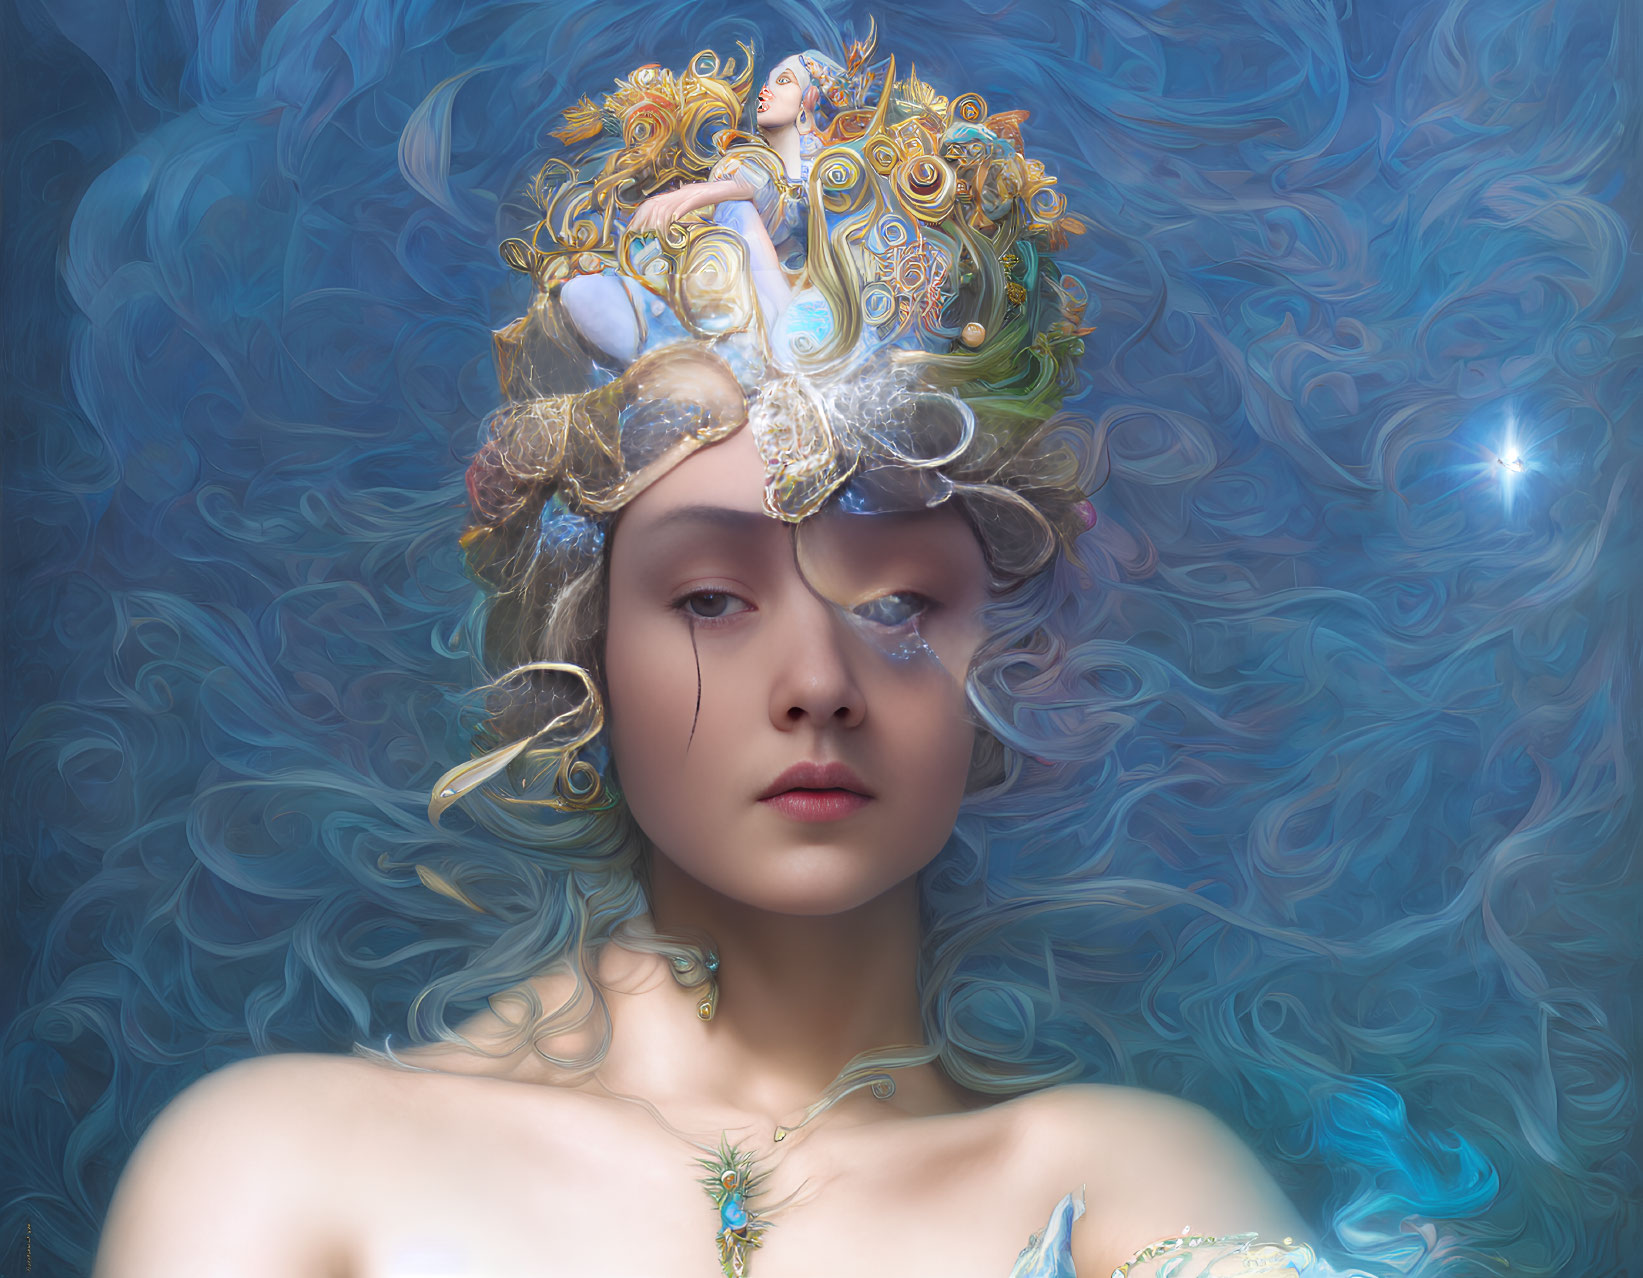 Woman adorned with ornate headpiece and intricate jewelry on swirling blue background